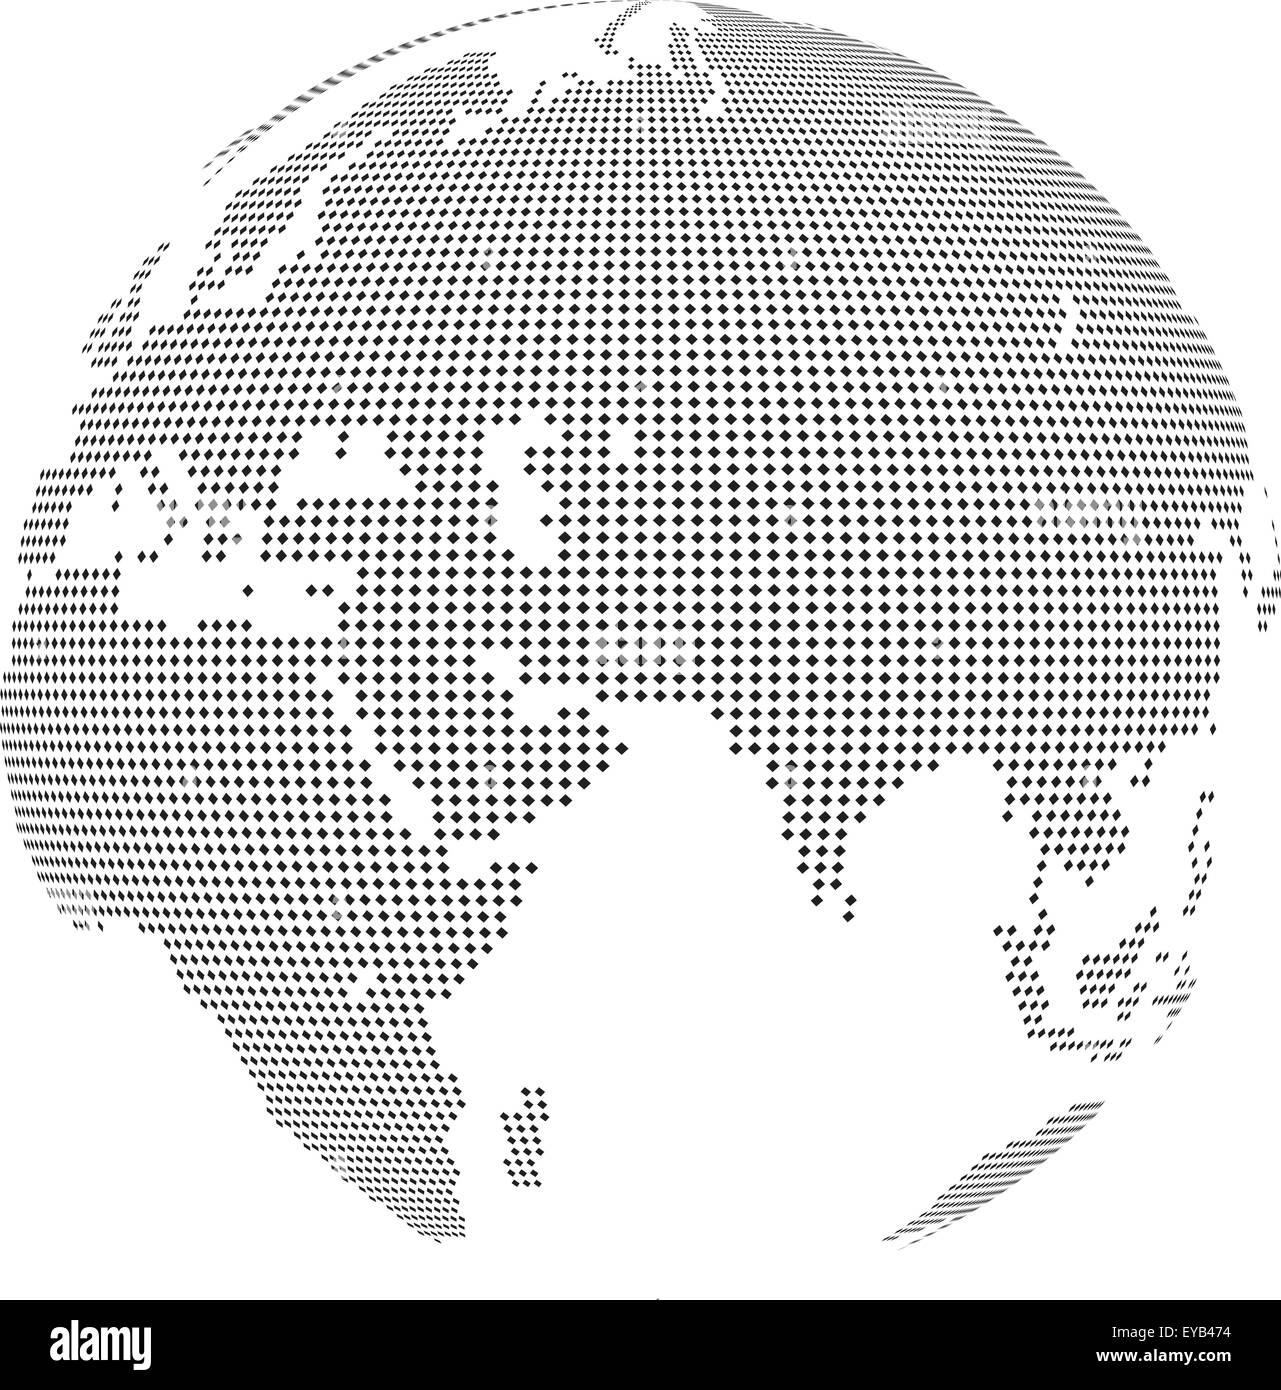 Vector illustration of world globe with square dots Stock Vector